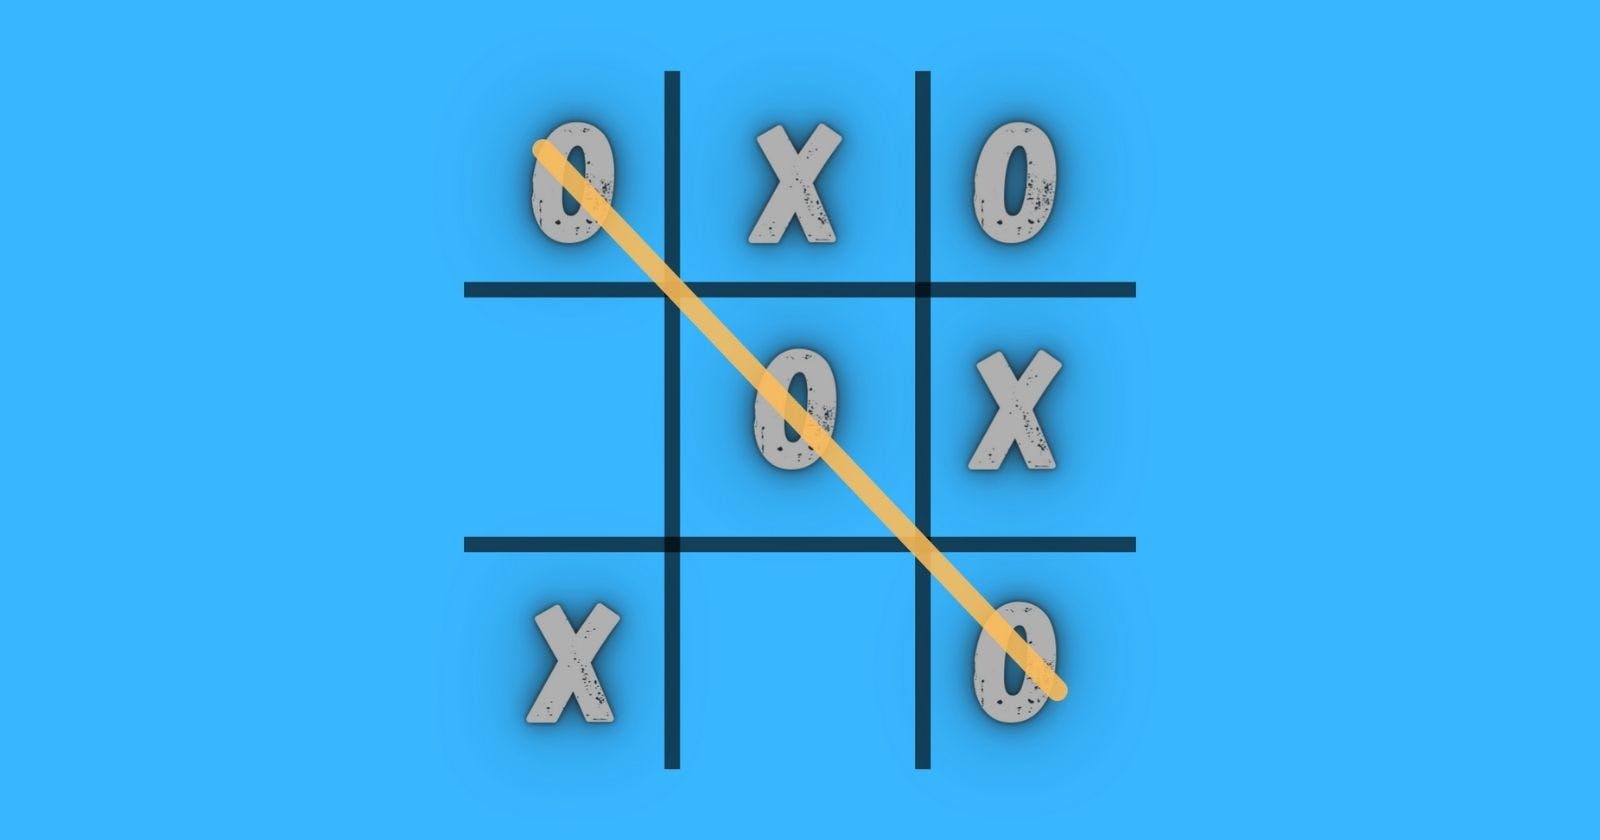 How to Create a Tic-tac-toe Game Using Python